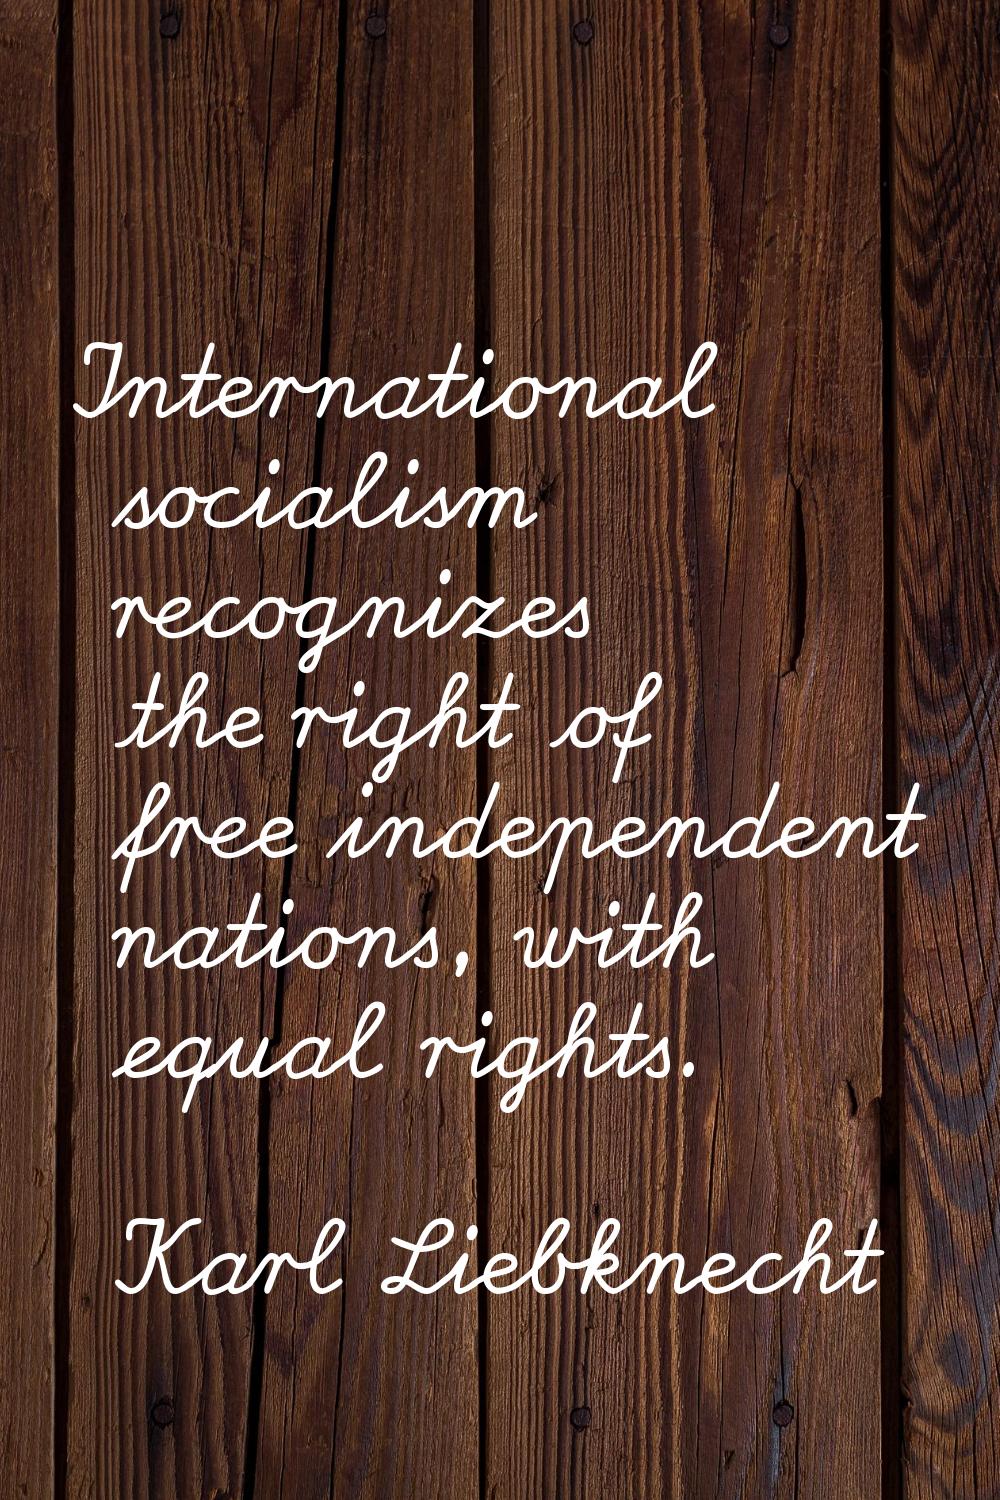 International socialism recognizes the right of free independent nations, with equal rights.